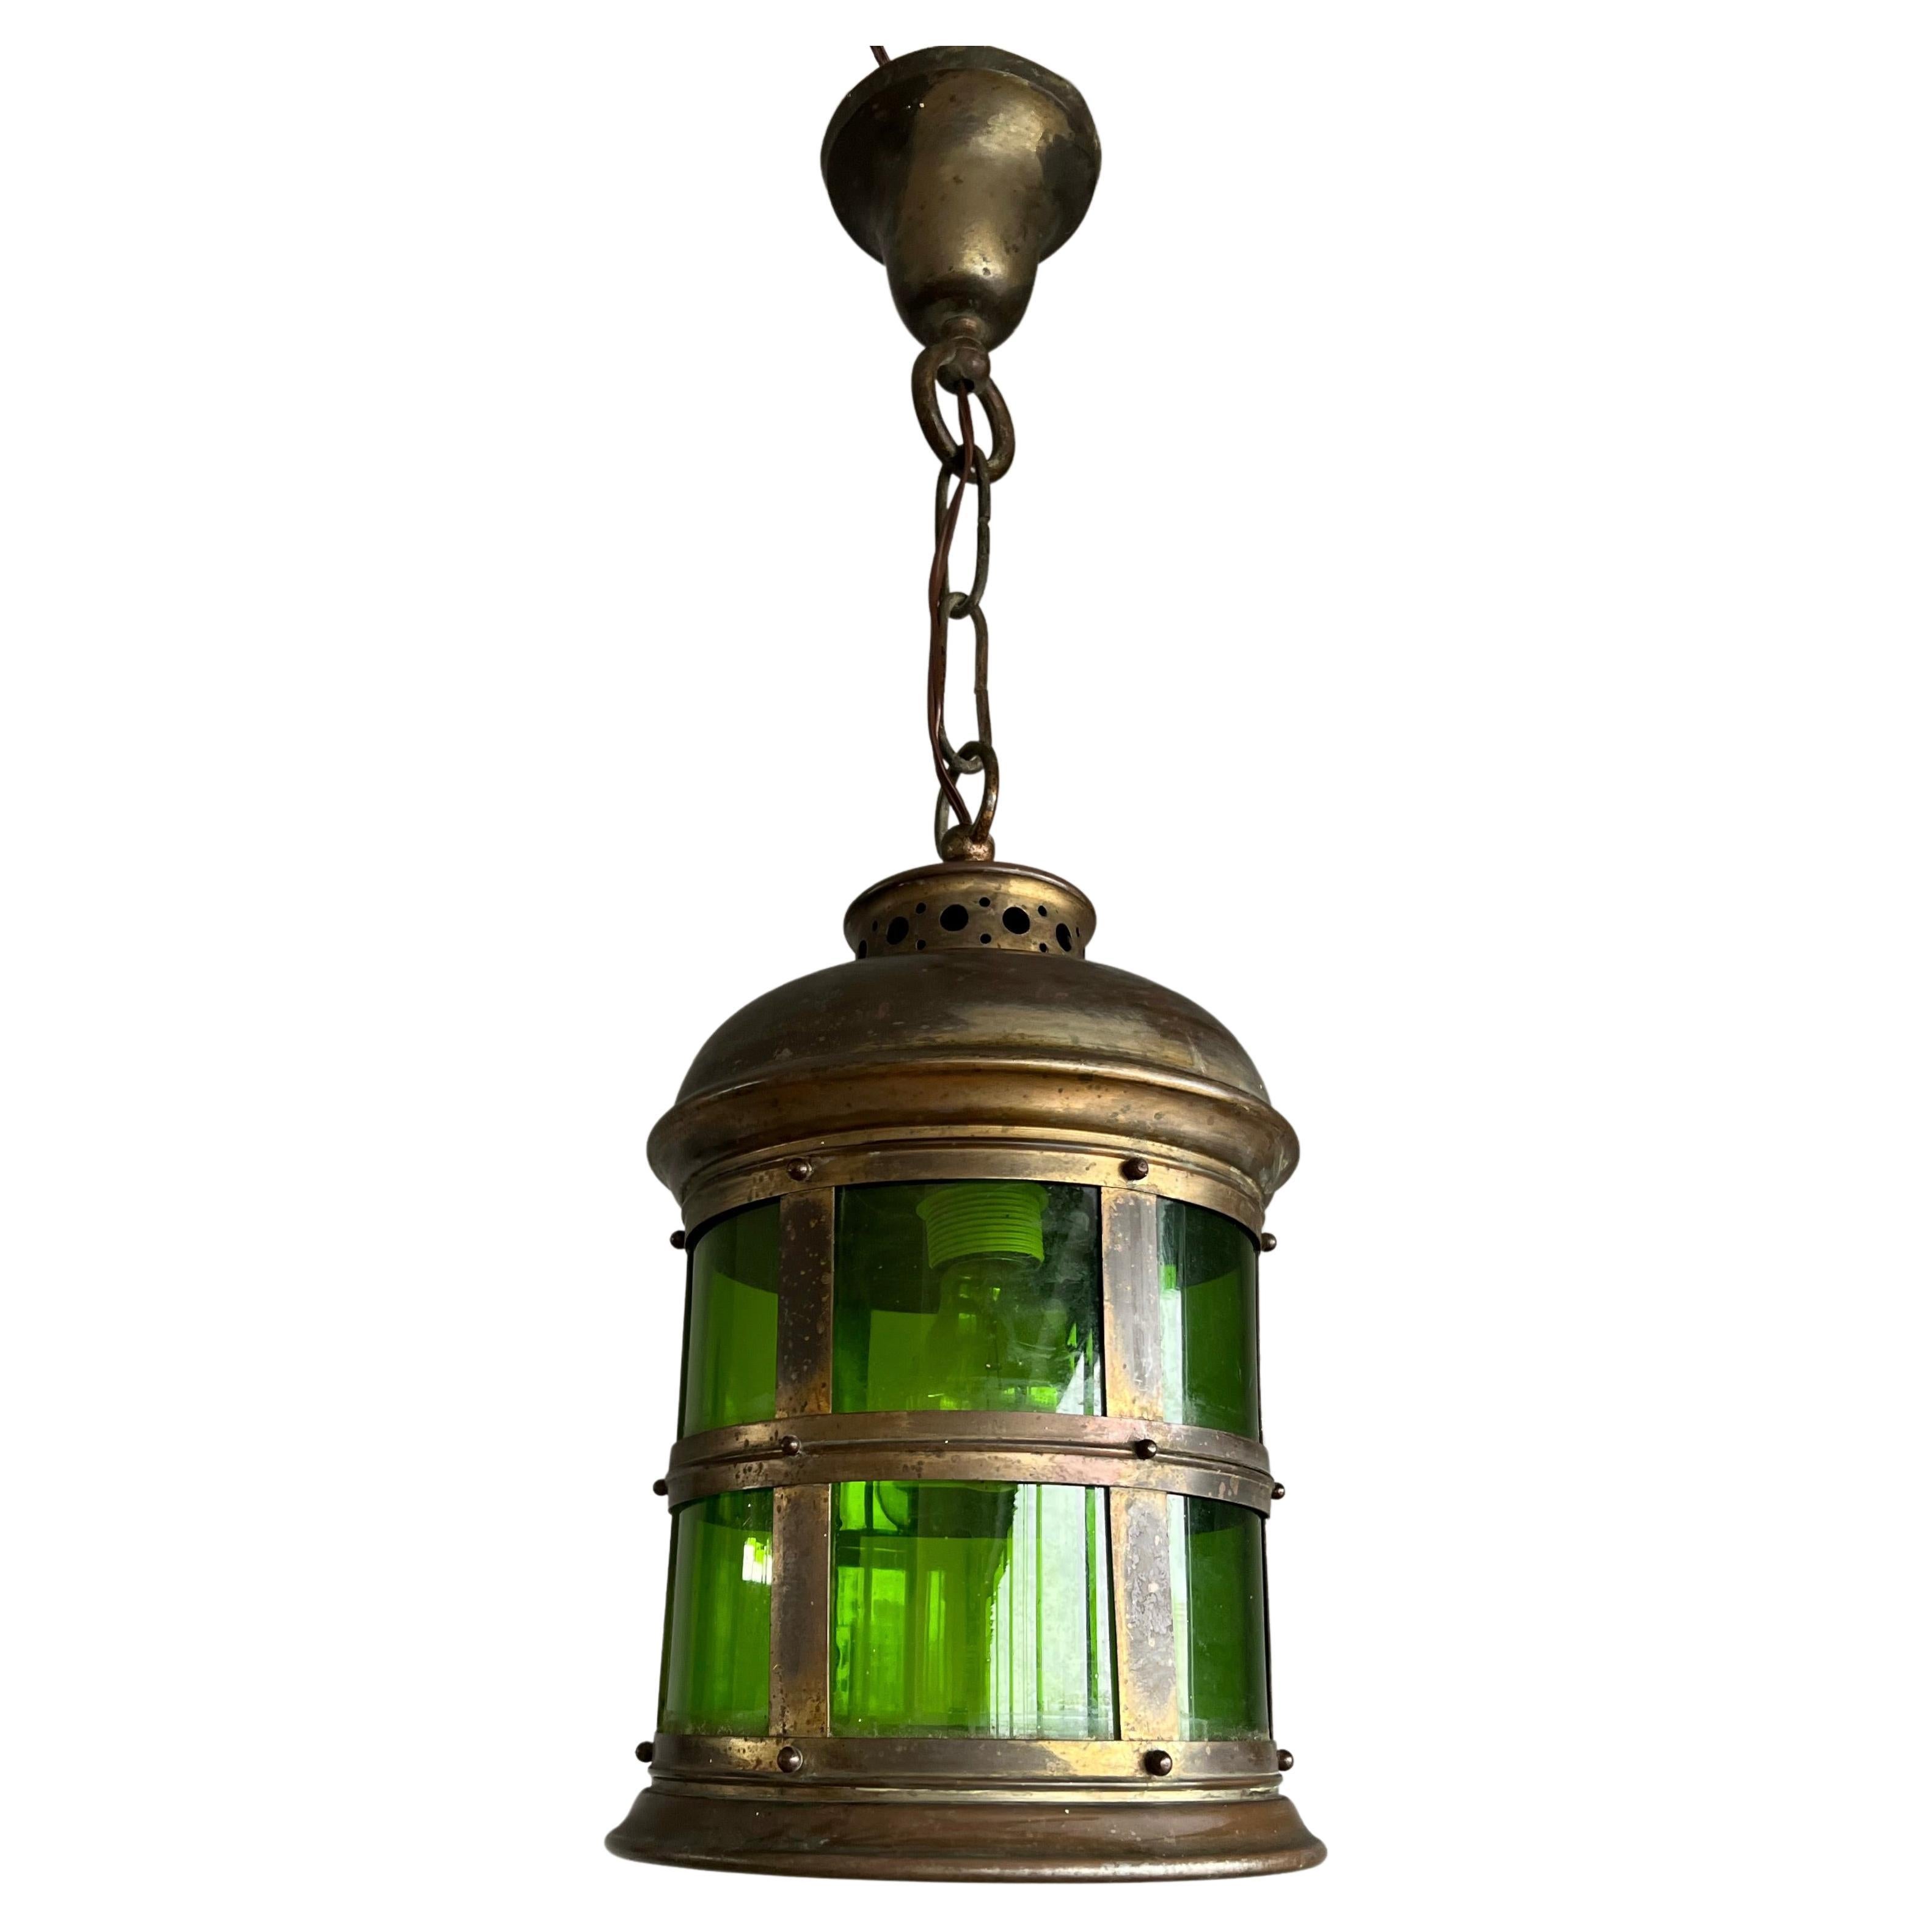 Arts & Crafts Handcrafted Copper & Green Stained Glass Circular Pendant Lantern